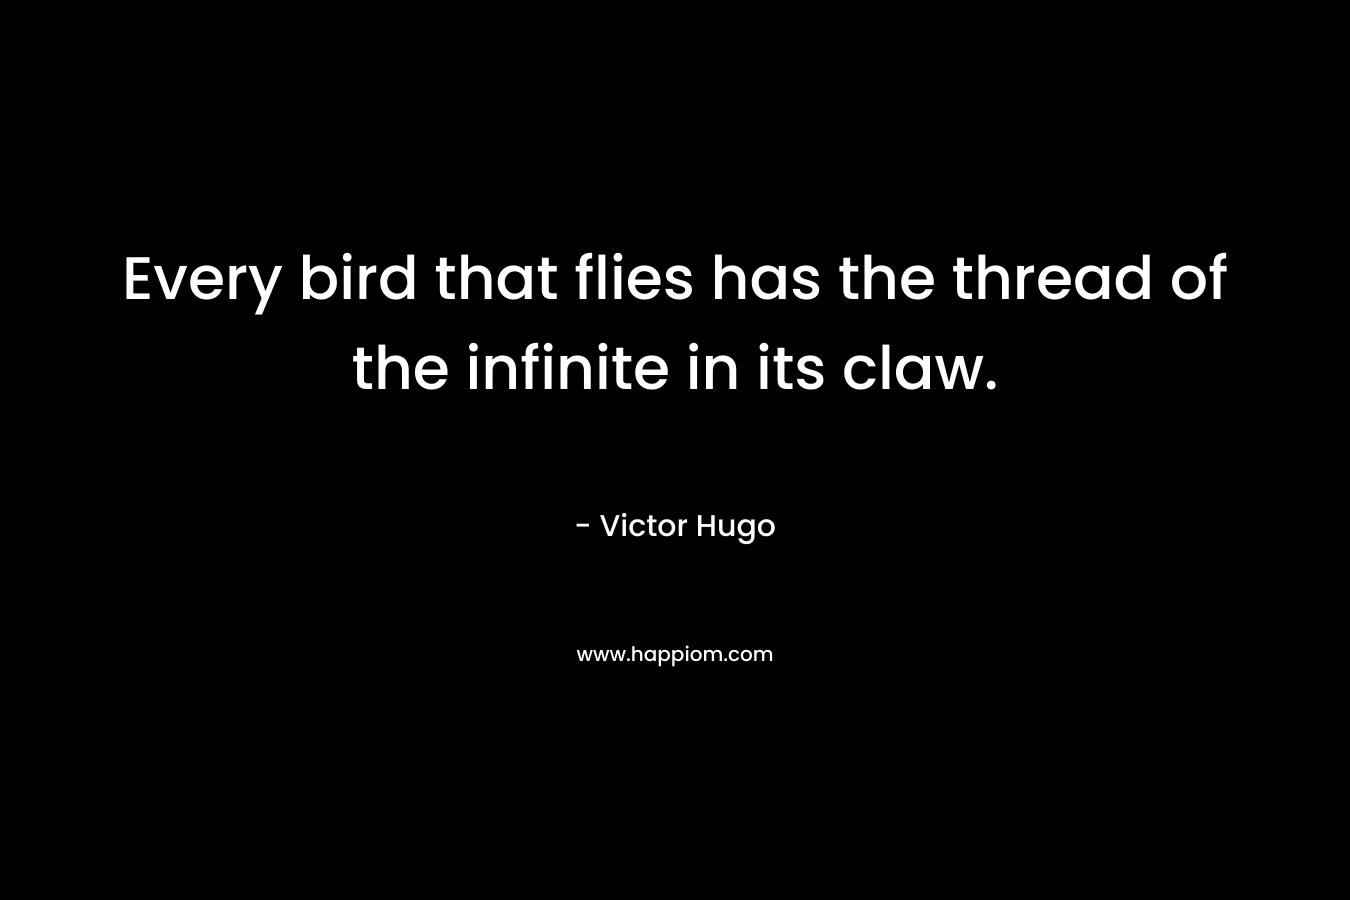 Every bird that flies has the thread of the infinite in its claw. – Victor Hugo